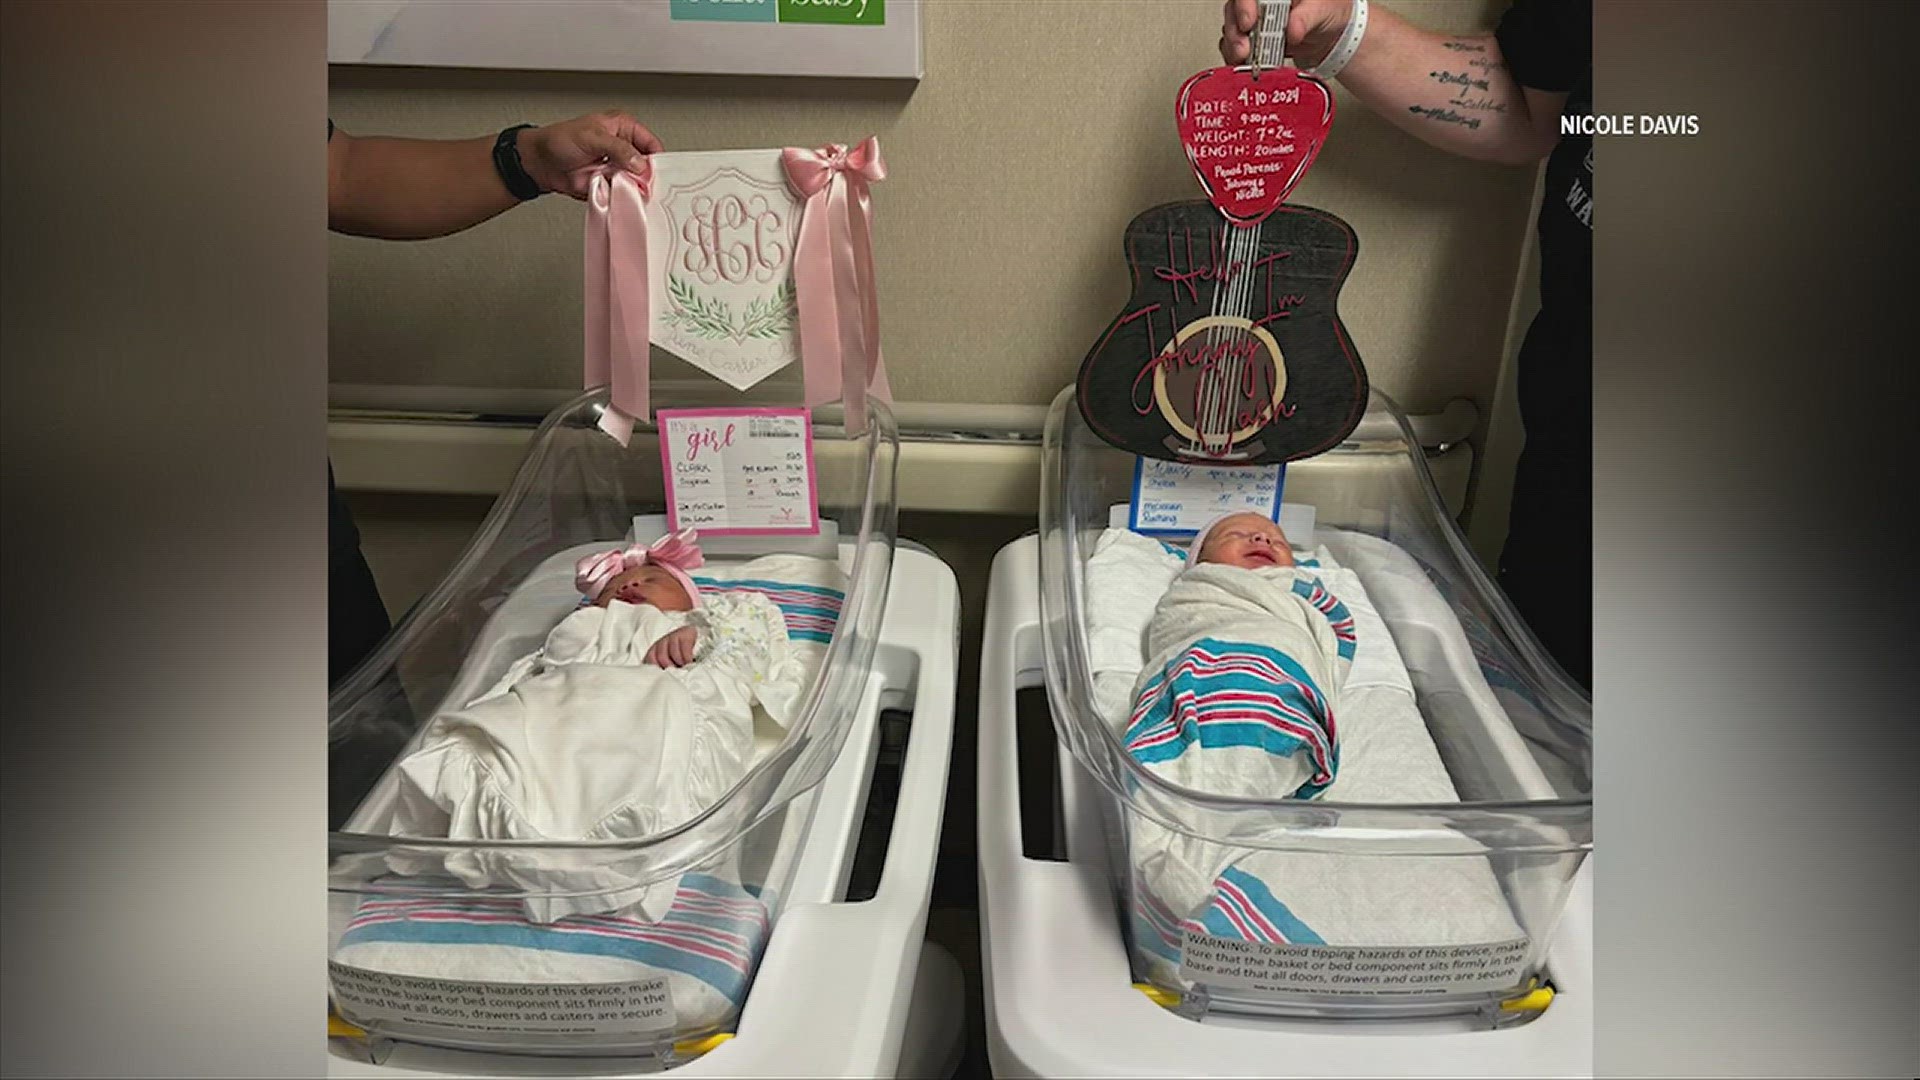 Two babies named after iconic country stars were delivered at nearly the same time Huntsville Hospital.